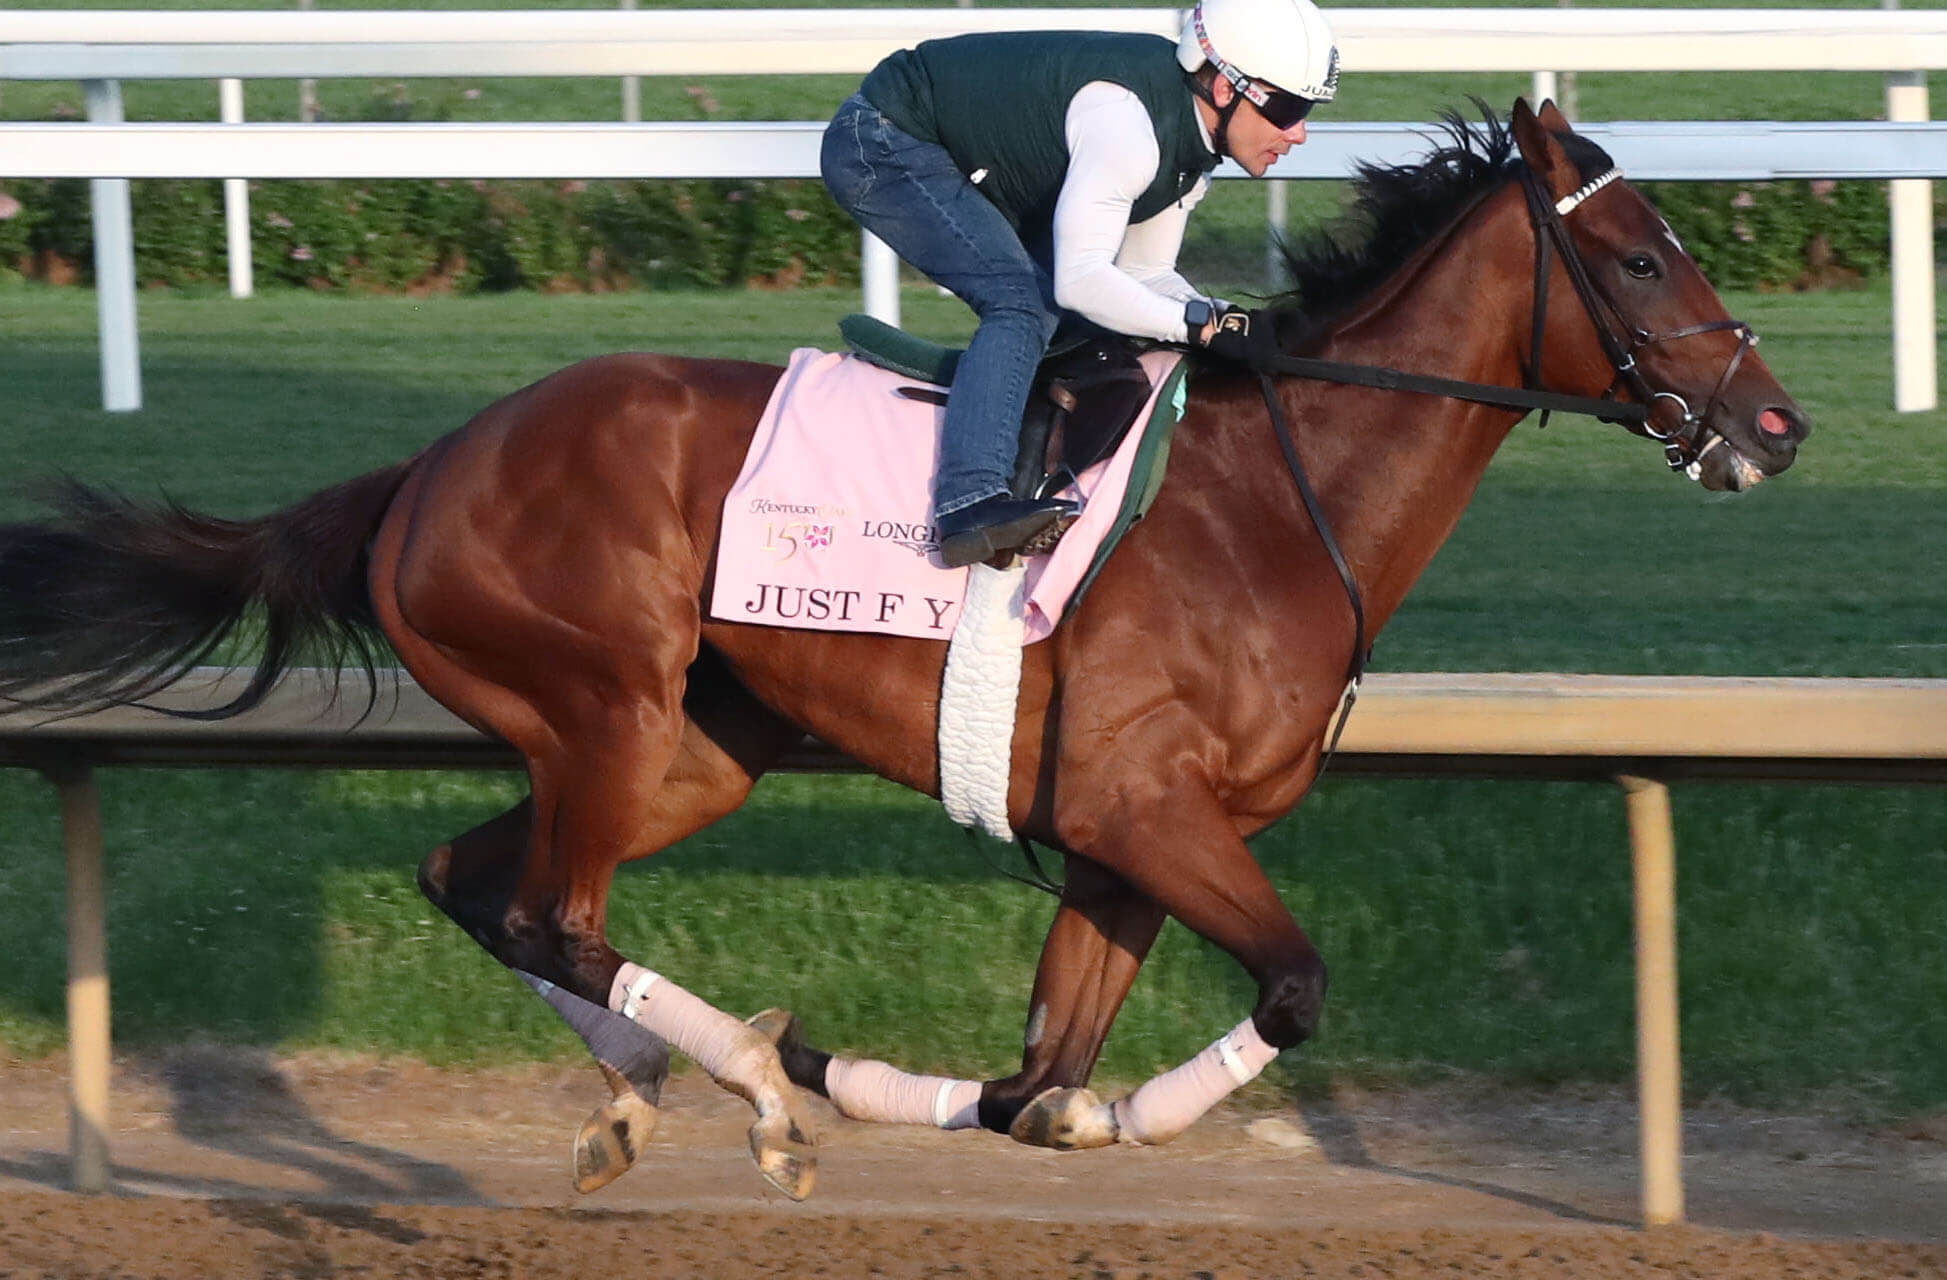 How To Bet - Early Kentucky Oaks Picks: Just F Y I Will Keep Pace